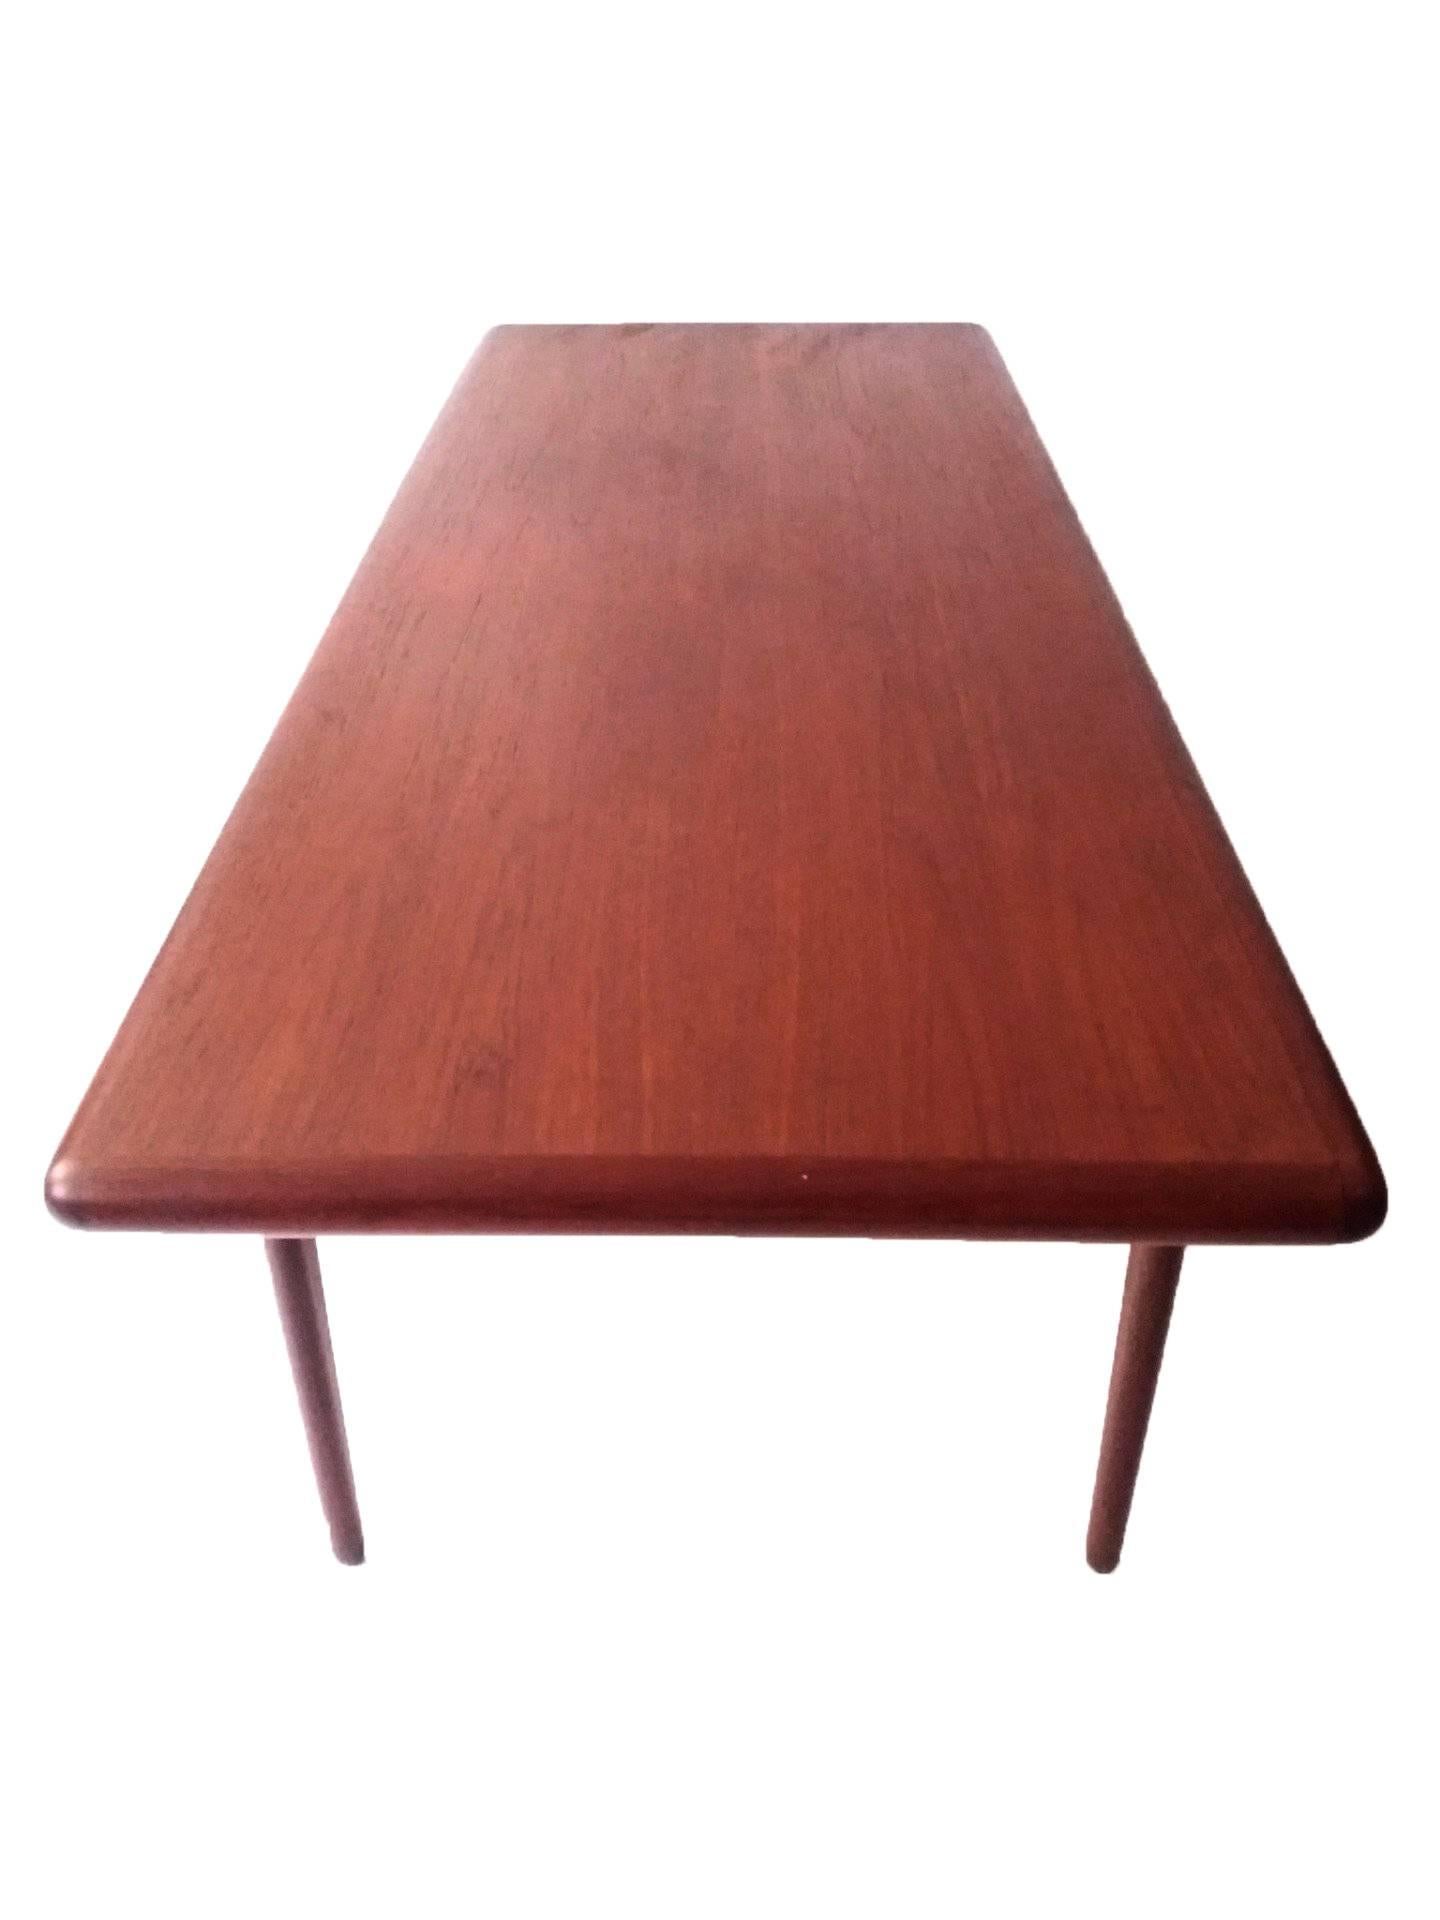 This rare Mid-Century Modern coffee table in teak is designed by Niels O. Møller in Denmark. It has elegant slender, tapered legs and a dark edge encompassing the table.